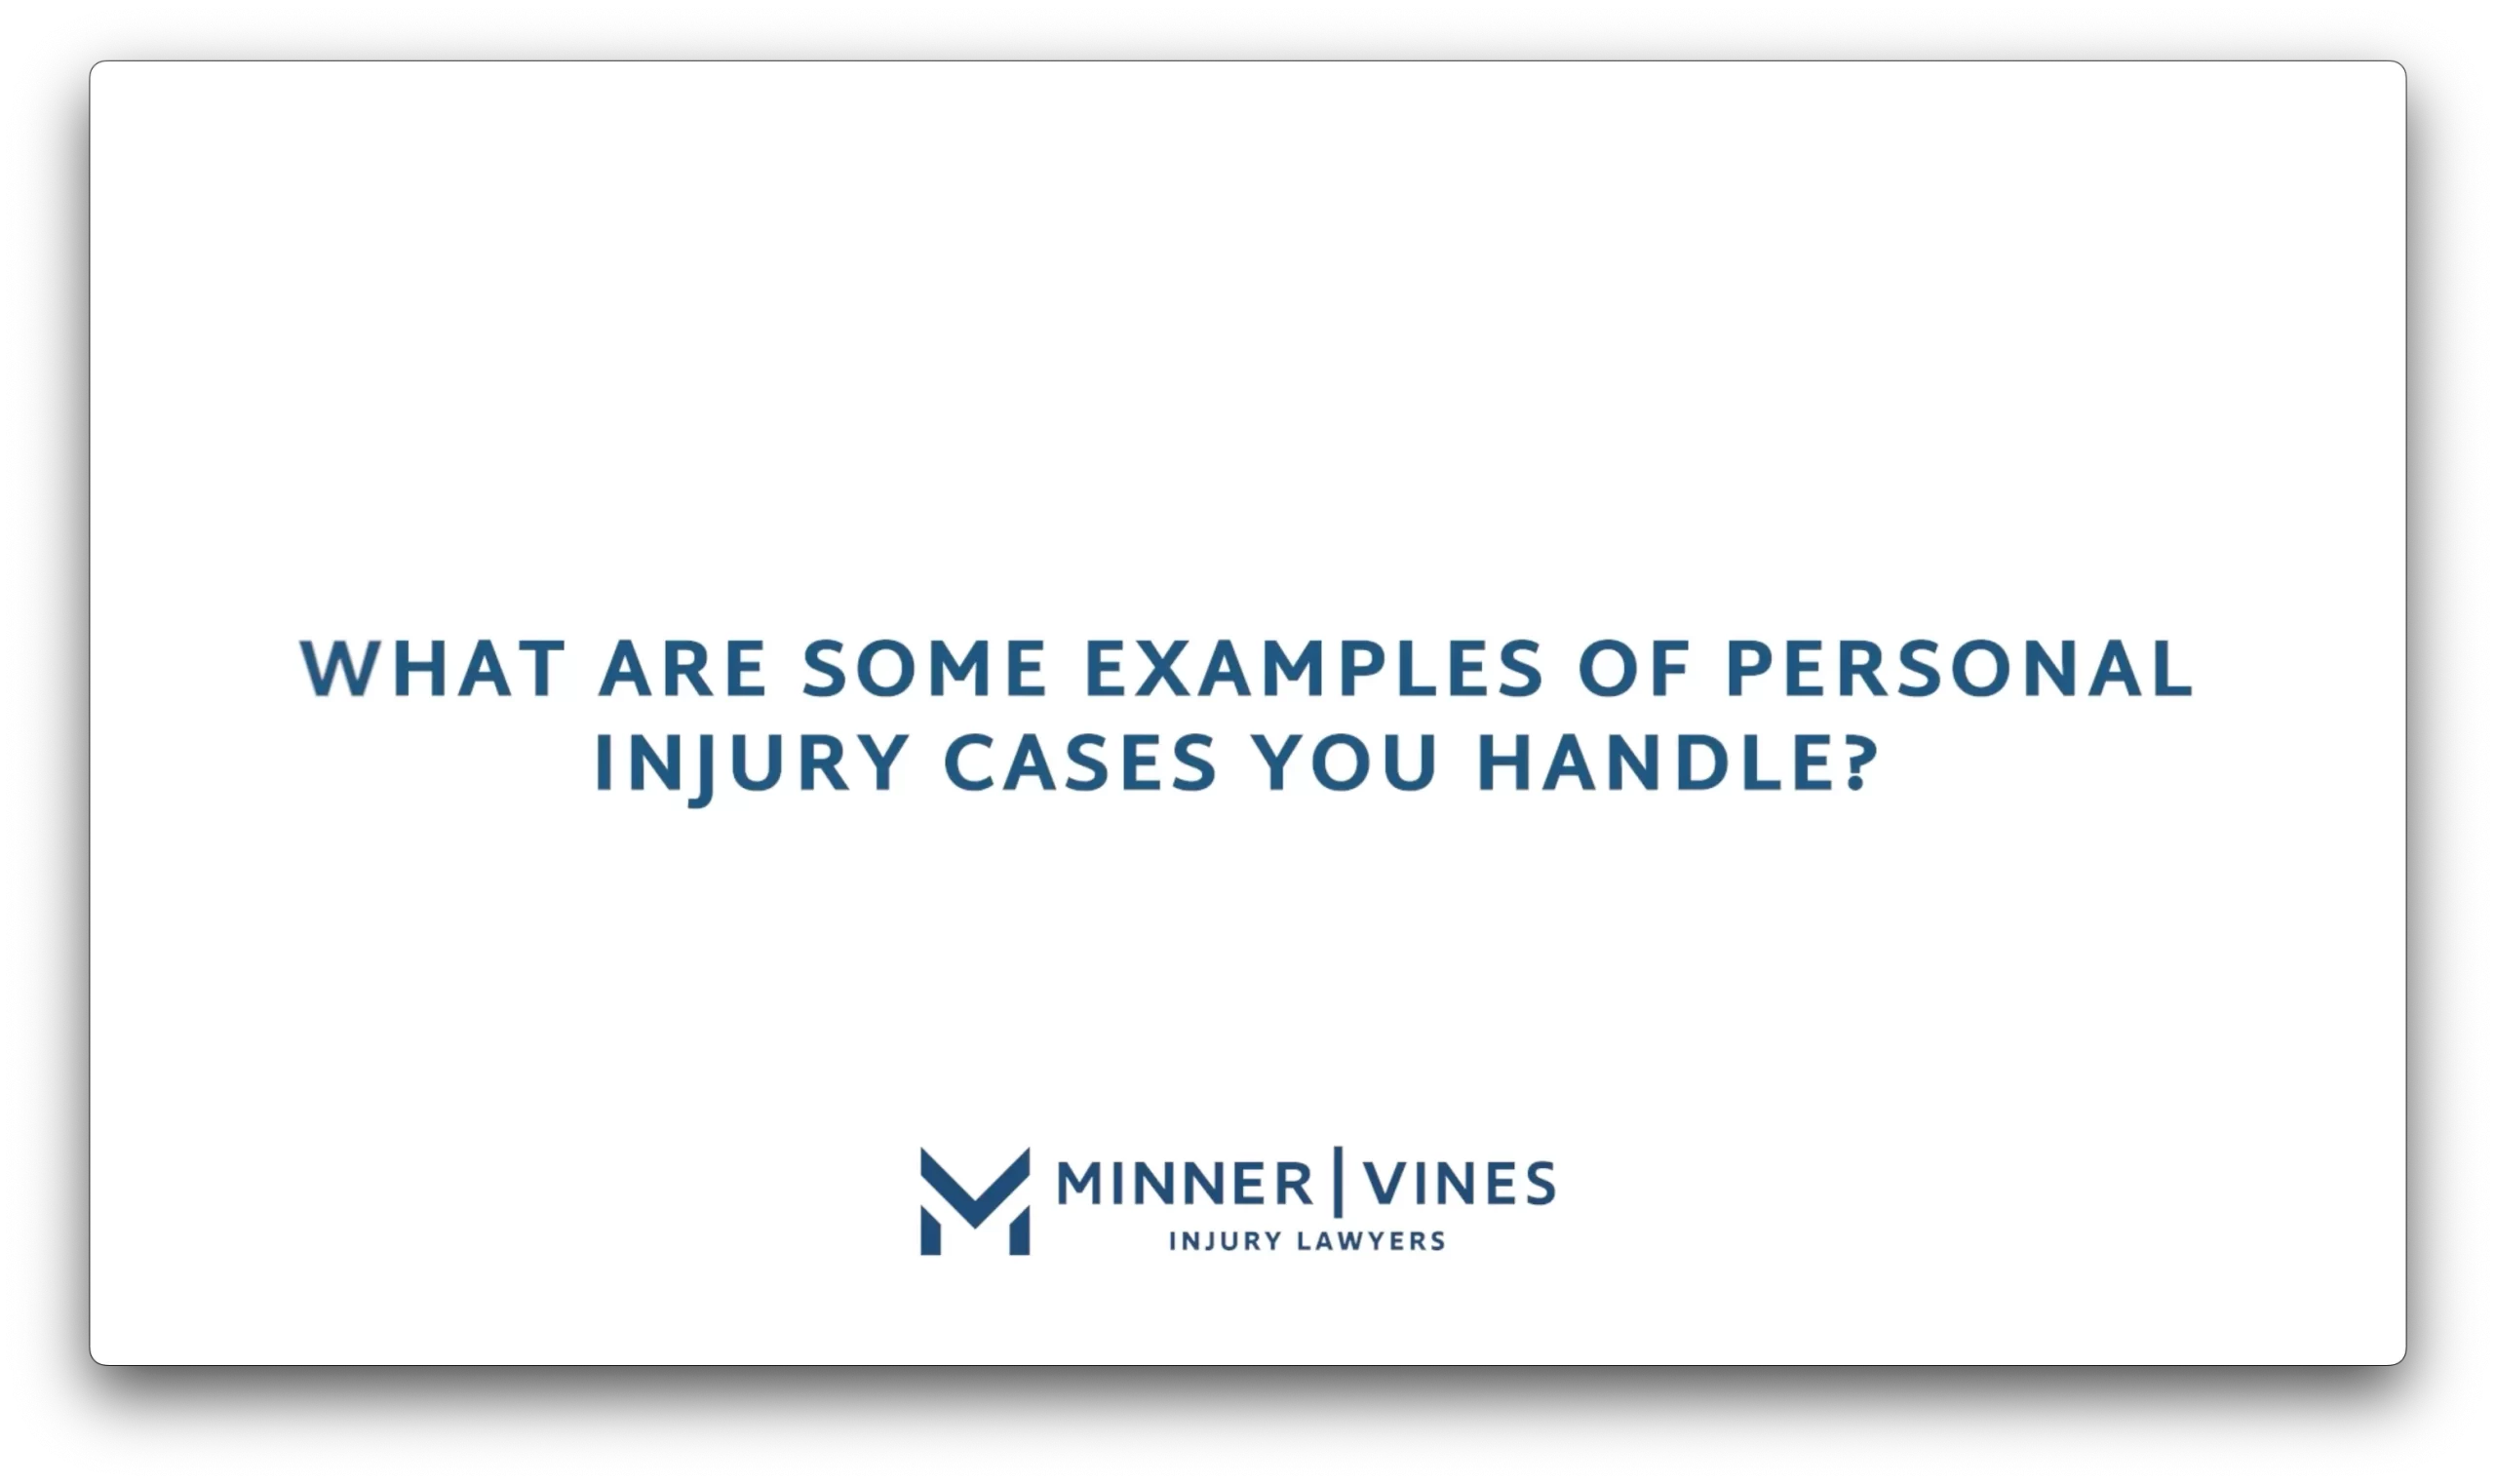 What are some examples of personal injury cases you handle?